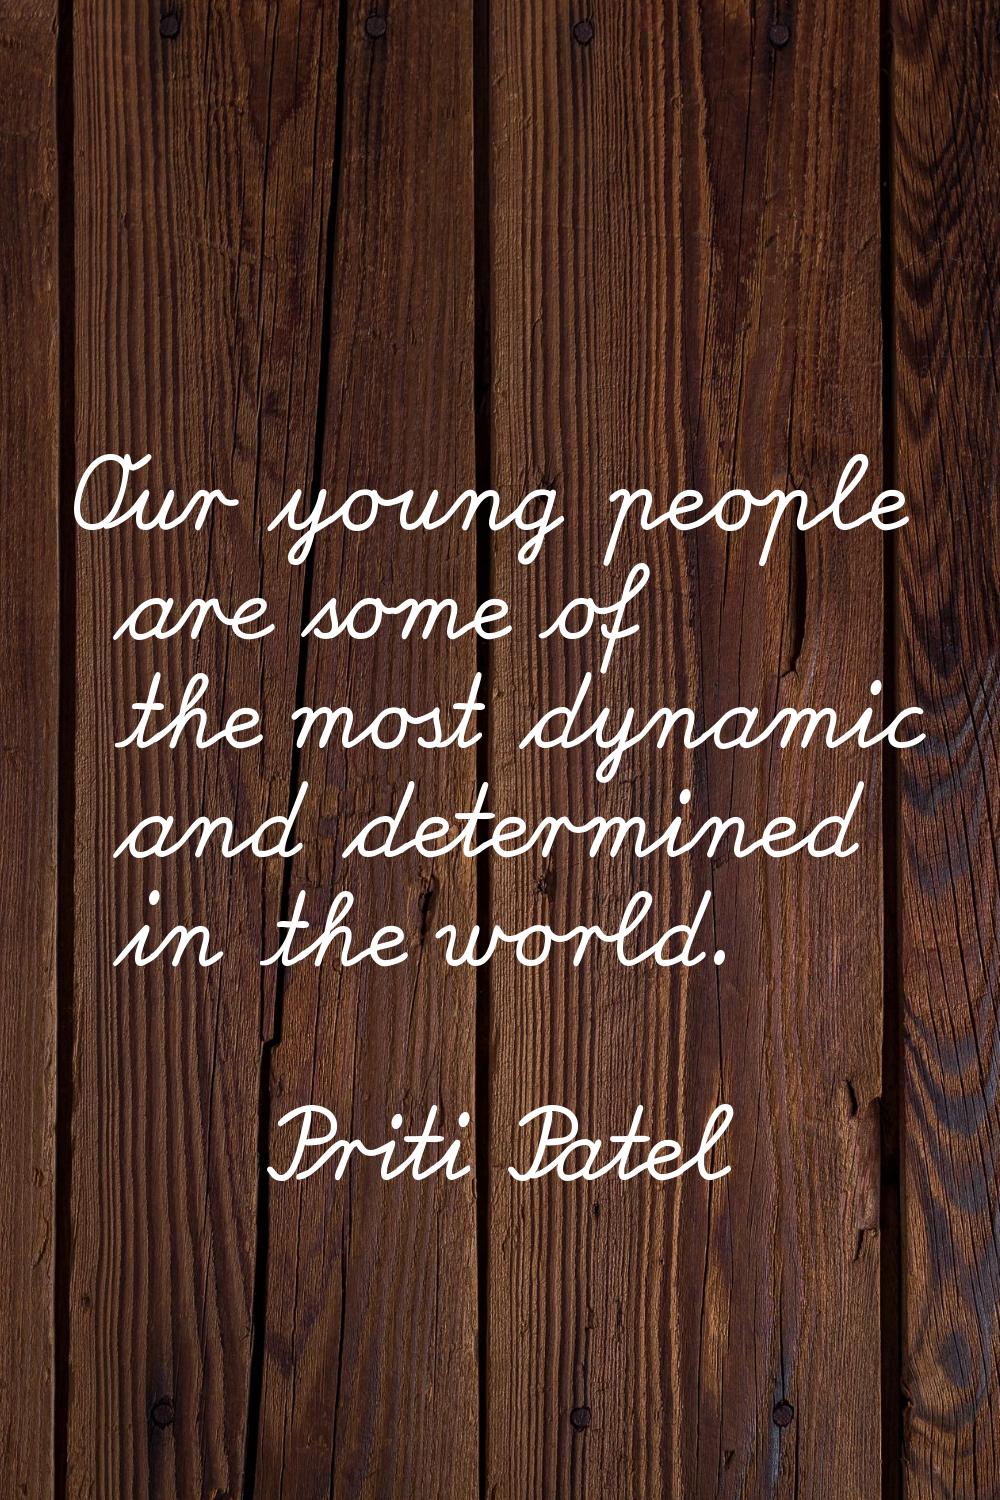 Our young people are some of the most dynamic and determined in the world.